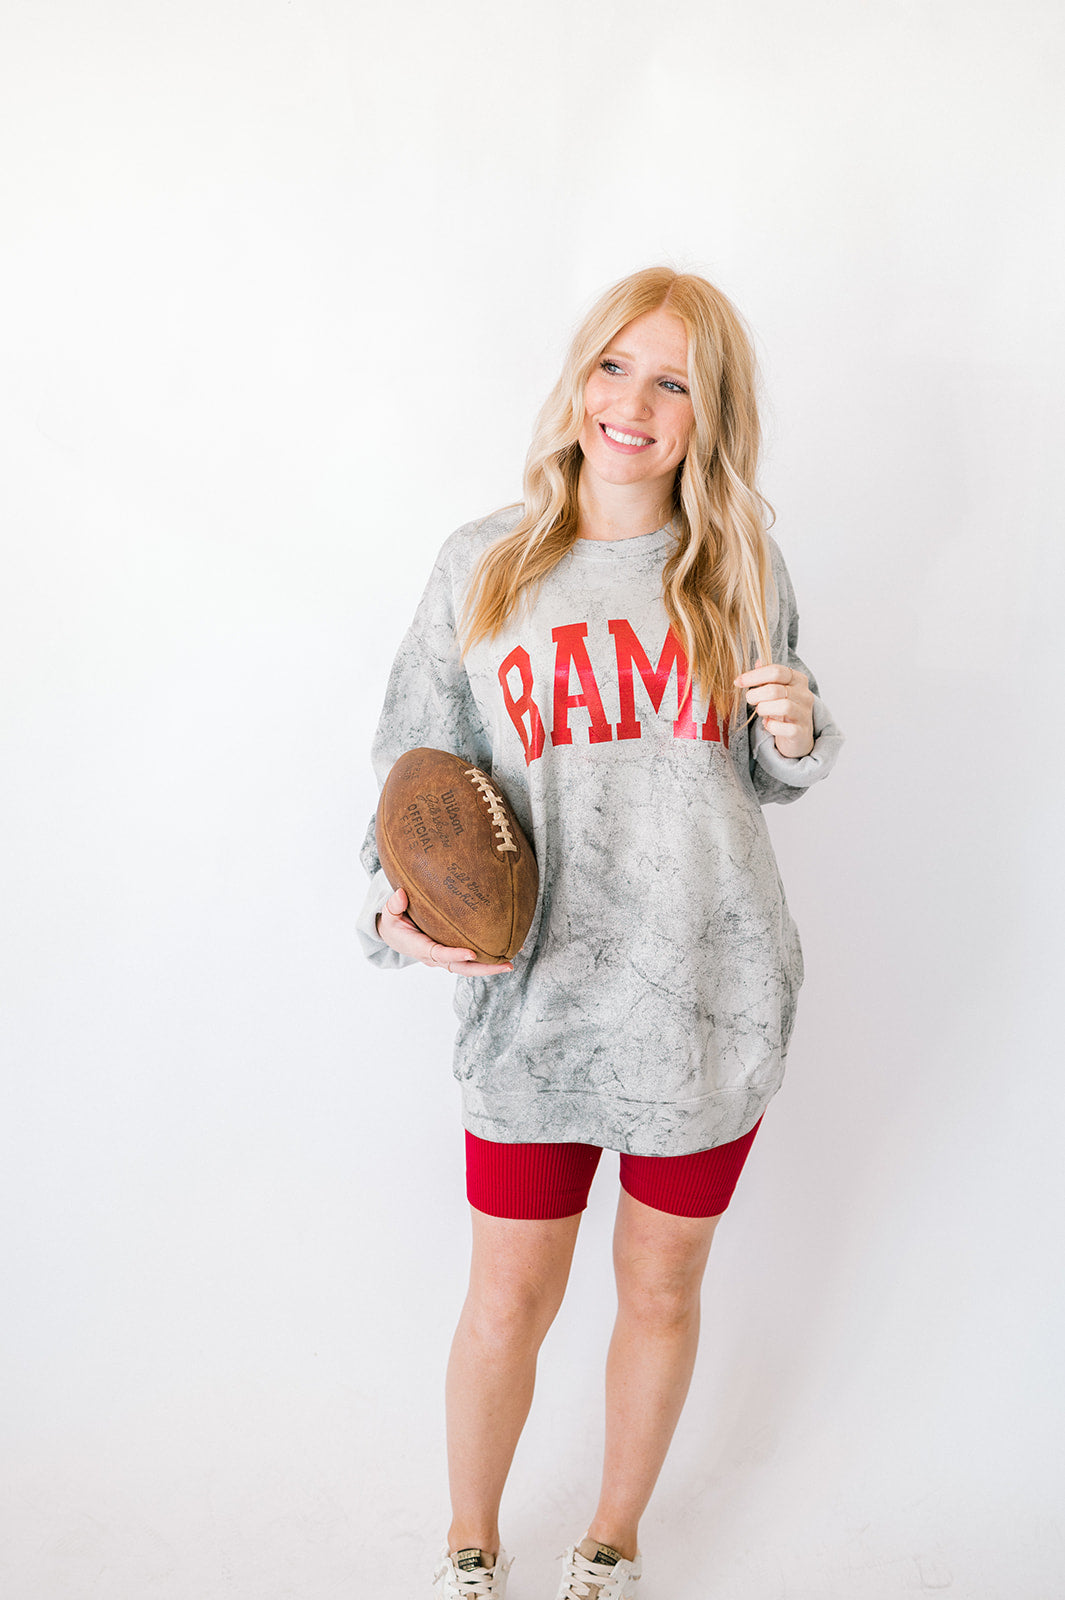 Bama Foil | Adult Colorblast Pullover-Adult Pullover-Sister Shirts-Sister Shirts, Cute & Custom Tees for Mama & Littles in Trussville, Alabama.